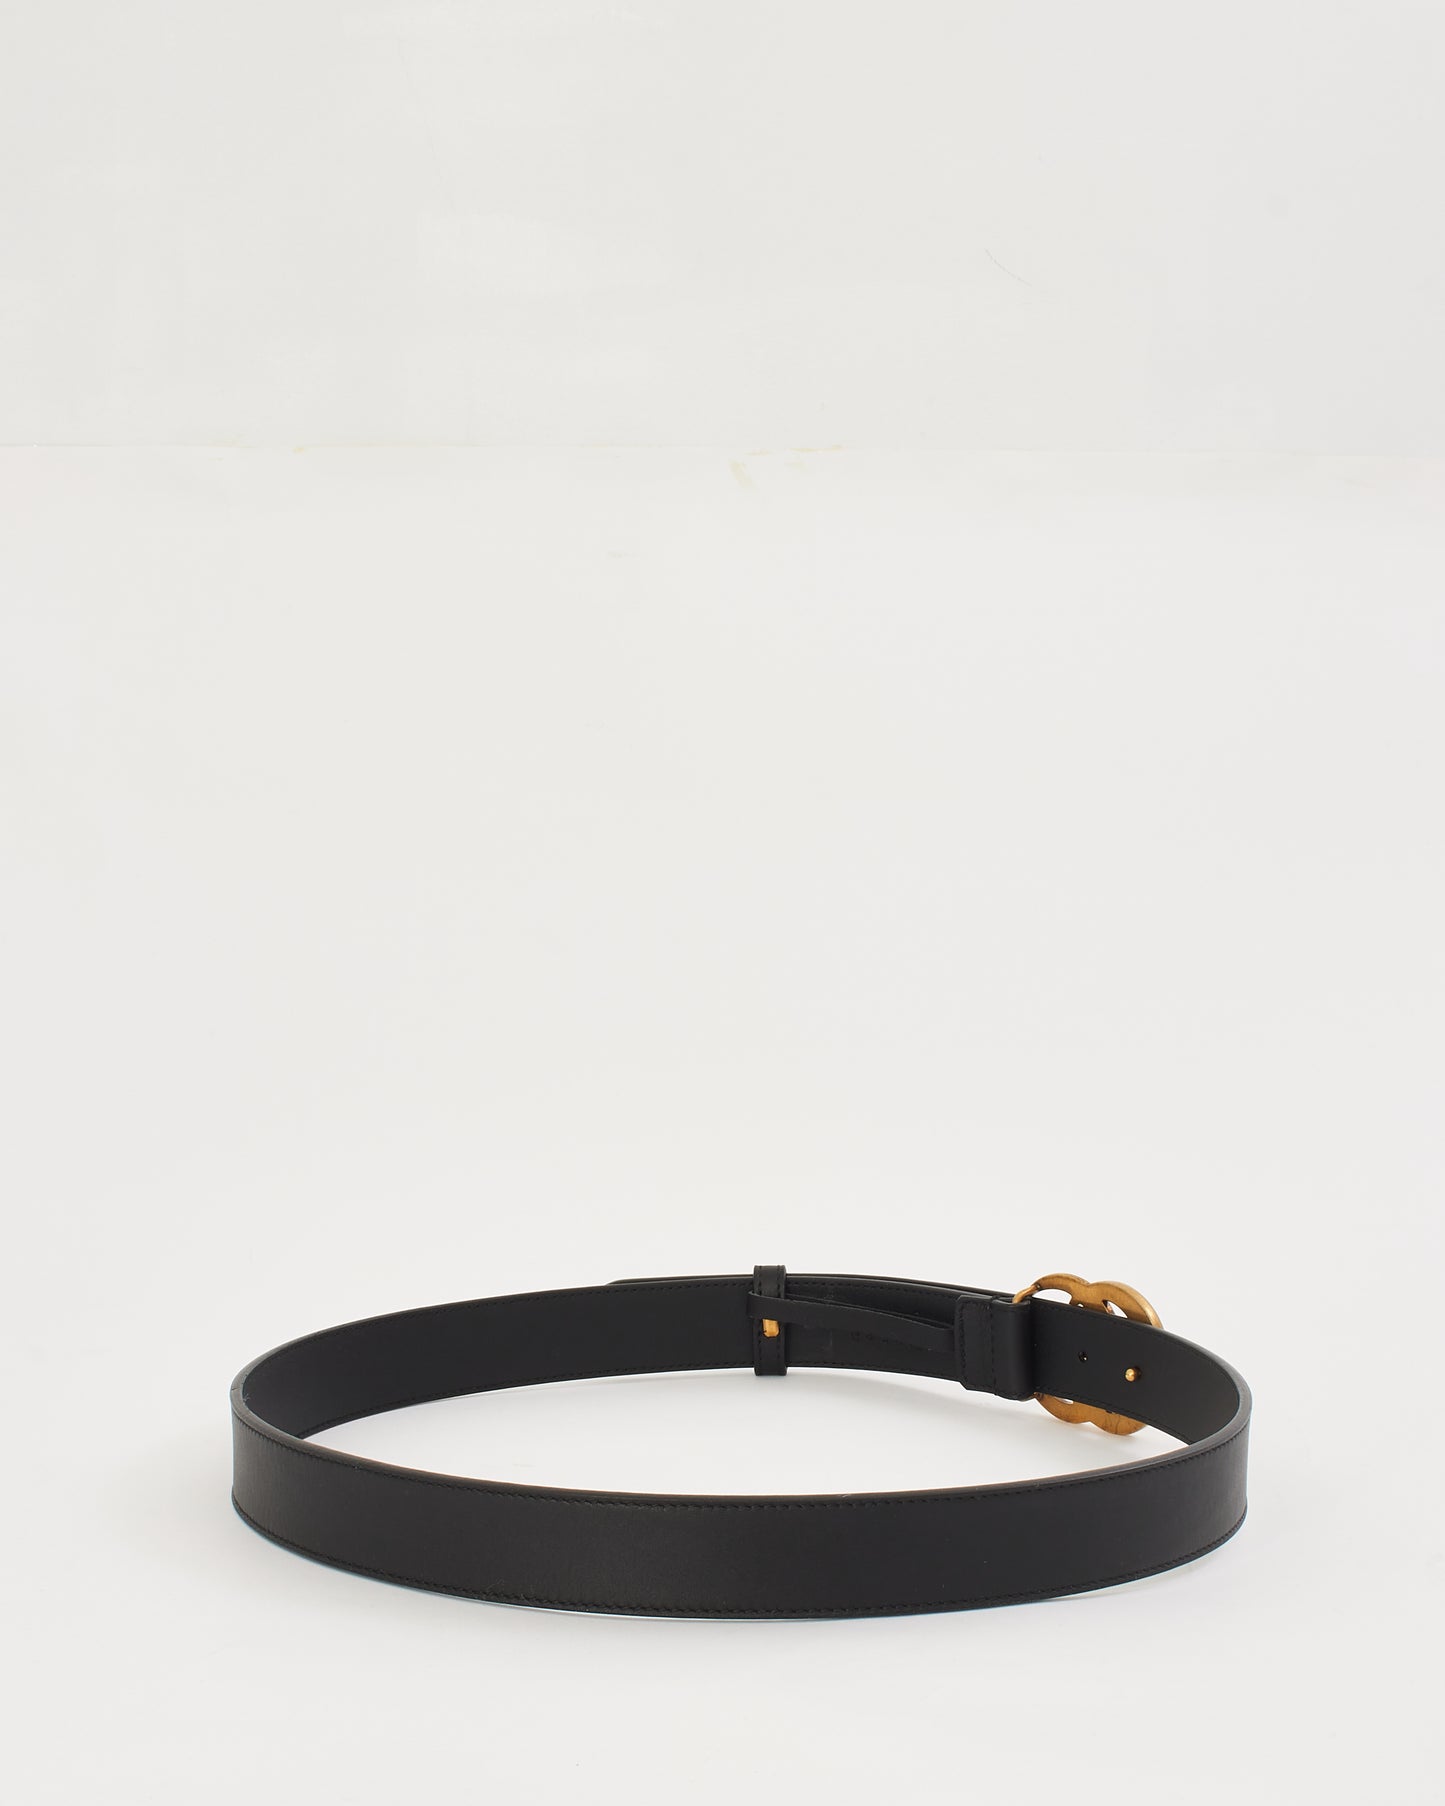 Gucci Black Leather GG Marmont Double G Buckle Belt - 90/36